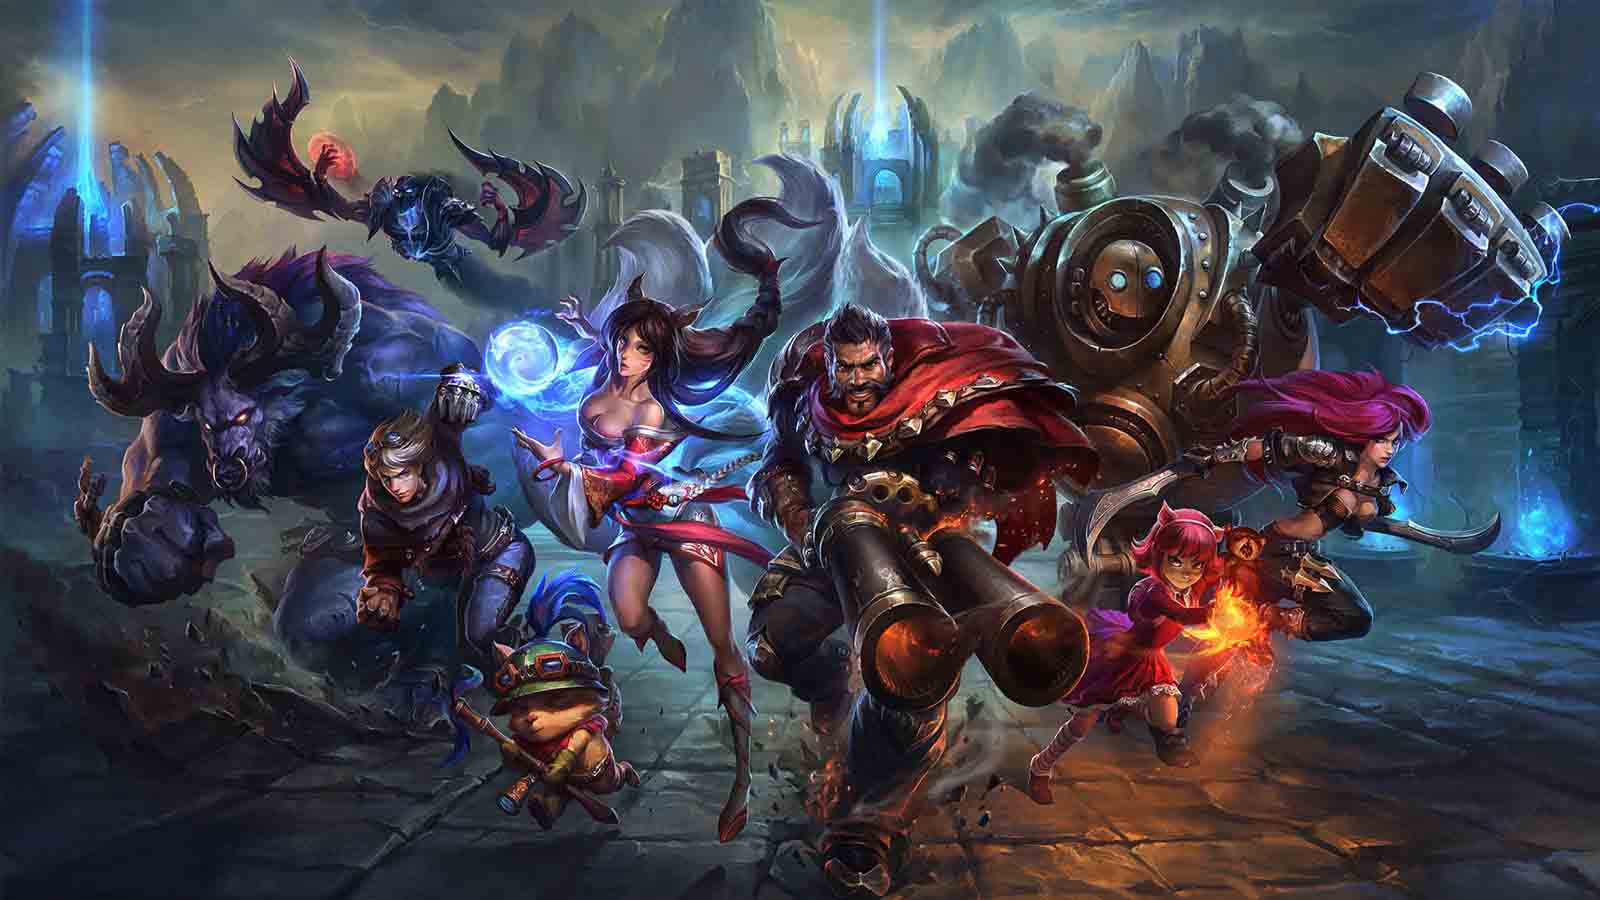 How can I switch my Garena account to Riot? Migration hyperlink, steps, and deadline